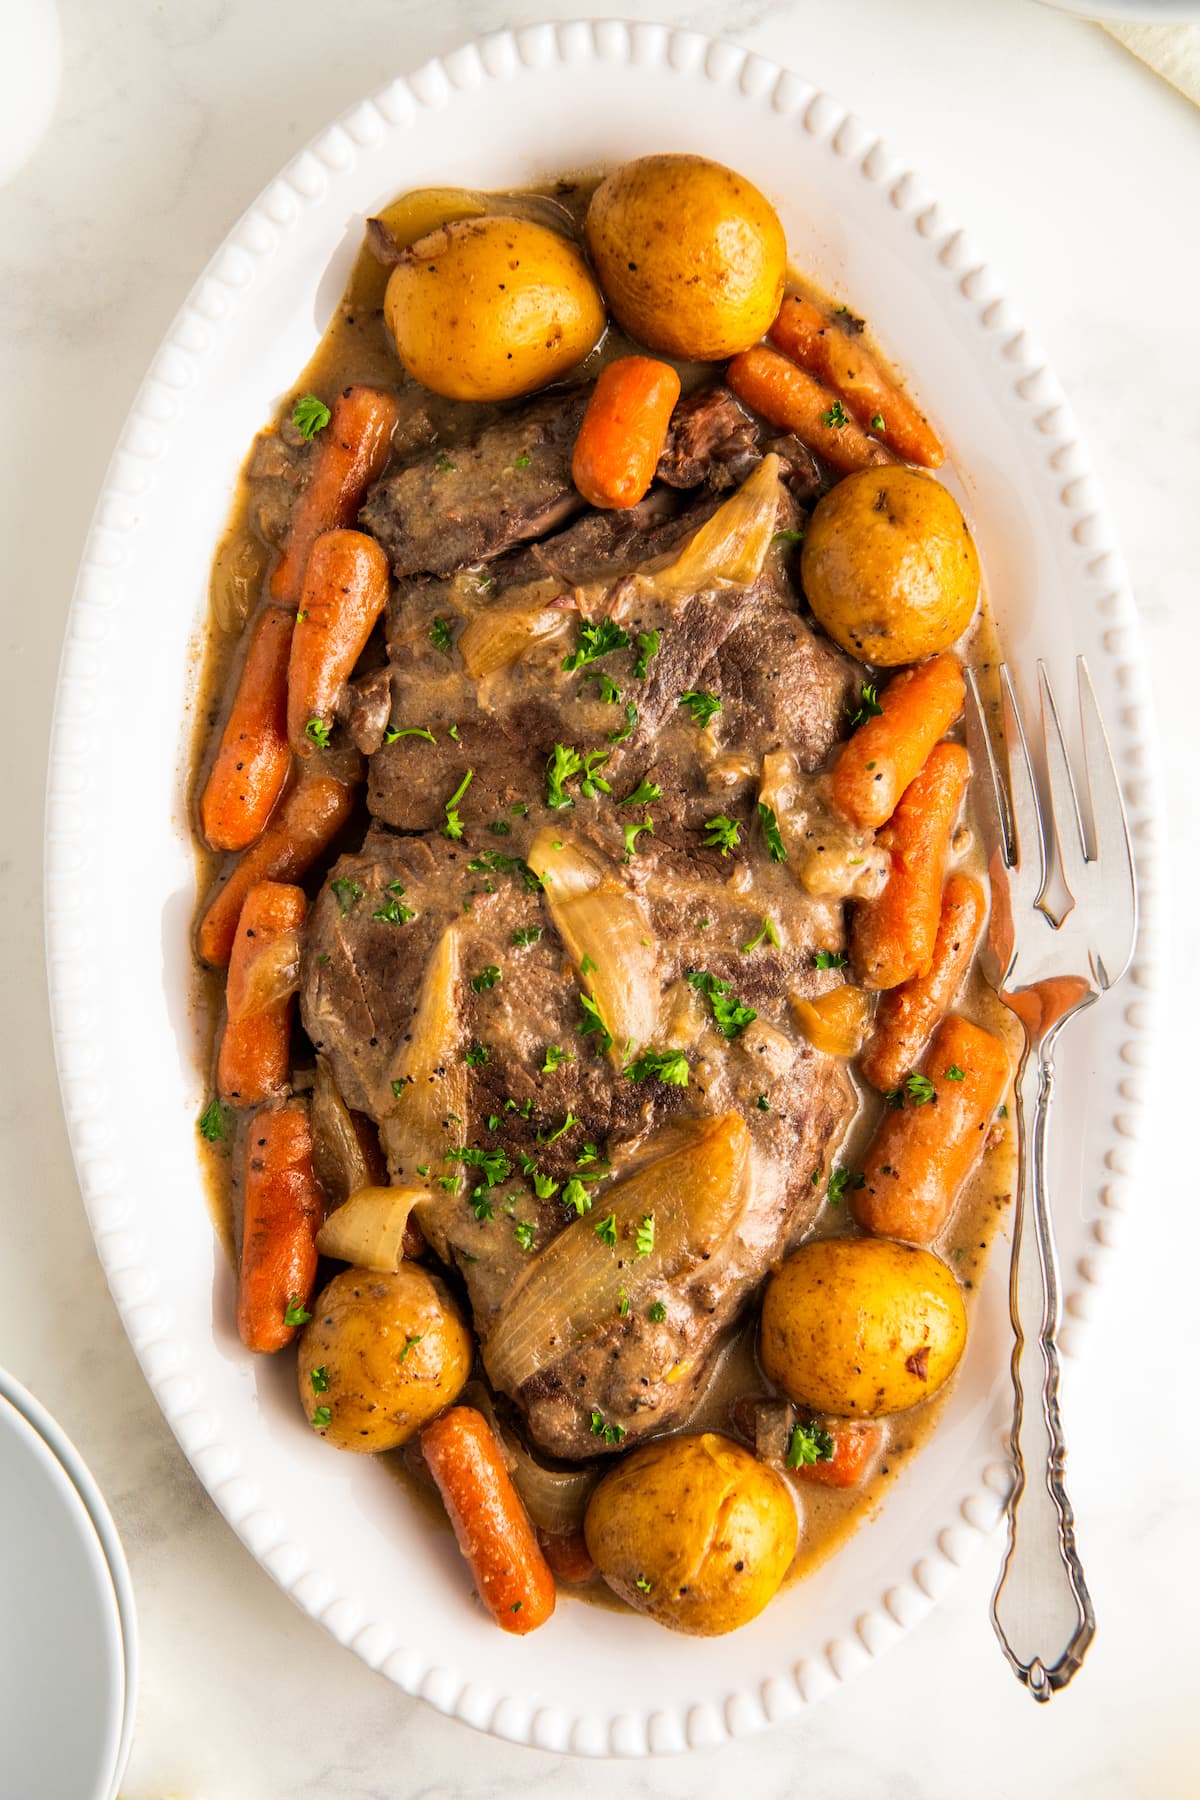 Crock pot London broil with vegetables in a brown gravy on a white serving platter with a serving fork on the side.